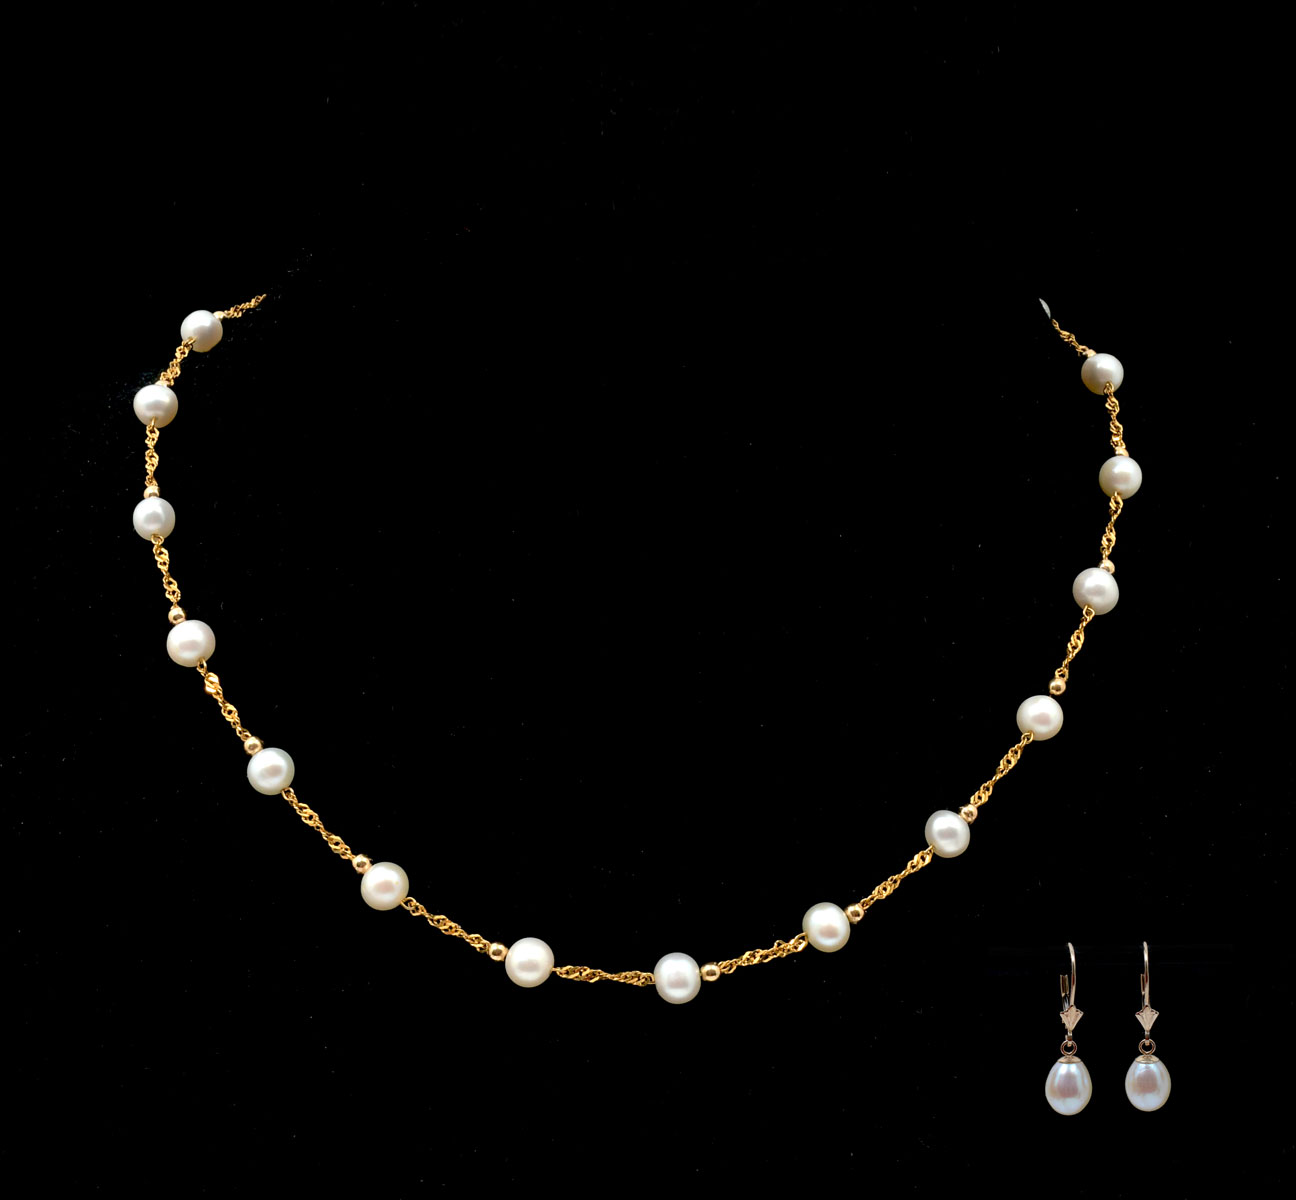 14K & PEARL NECKLACE AND EARRINGS: 17.5